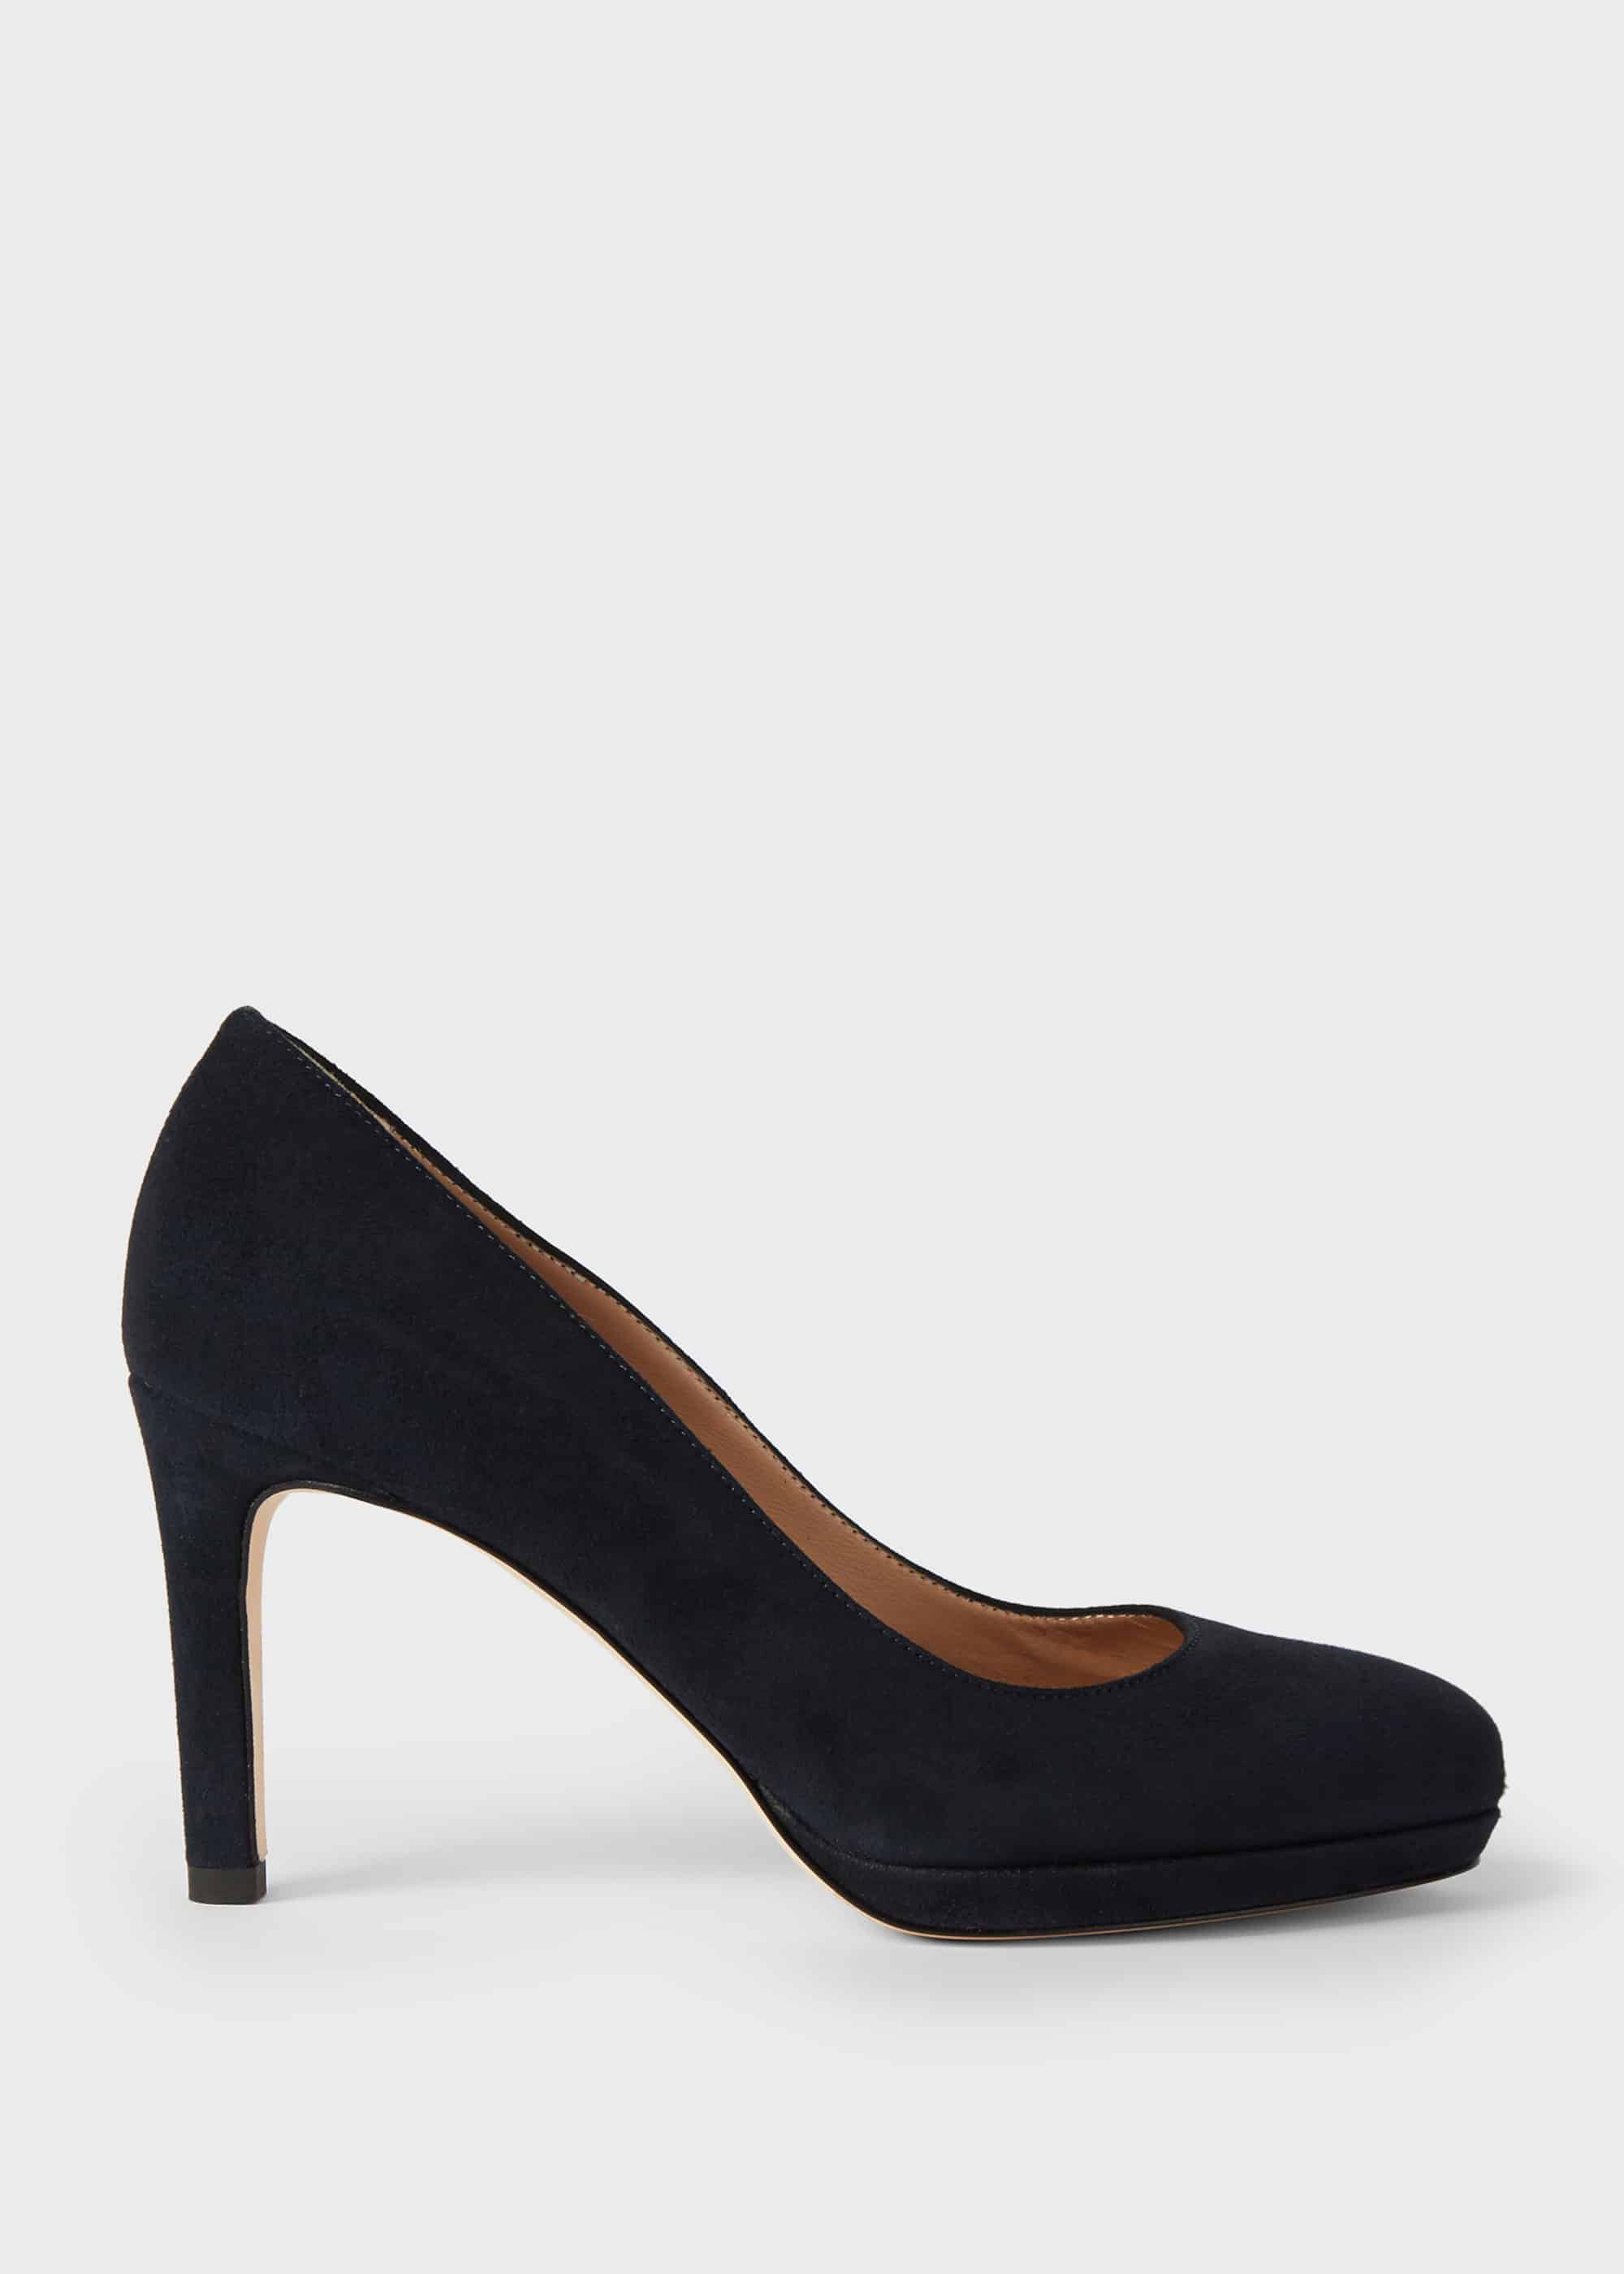 navy court shoes leather